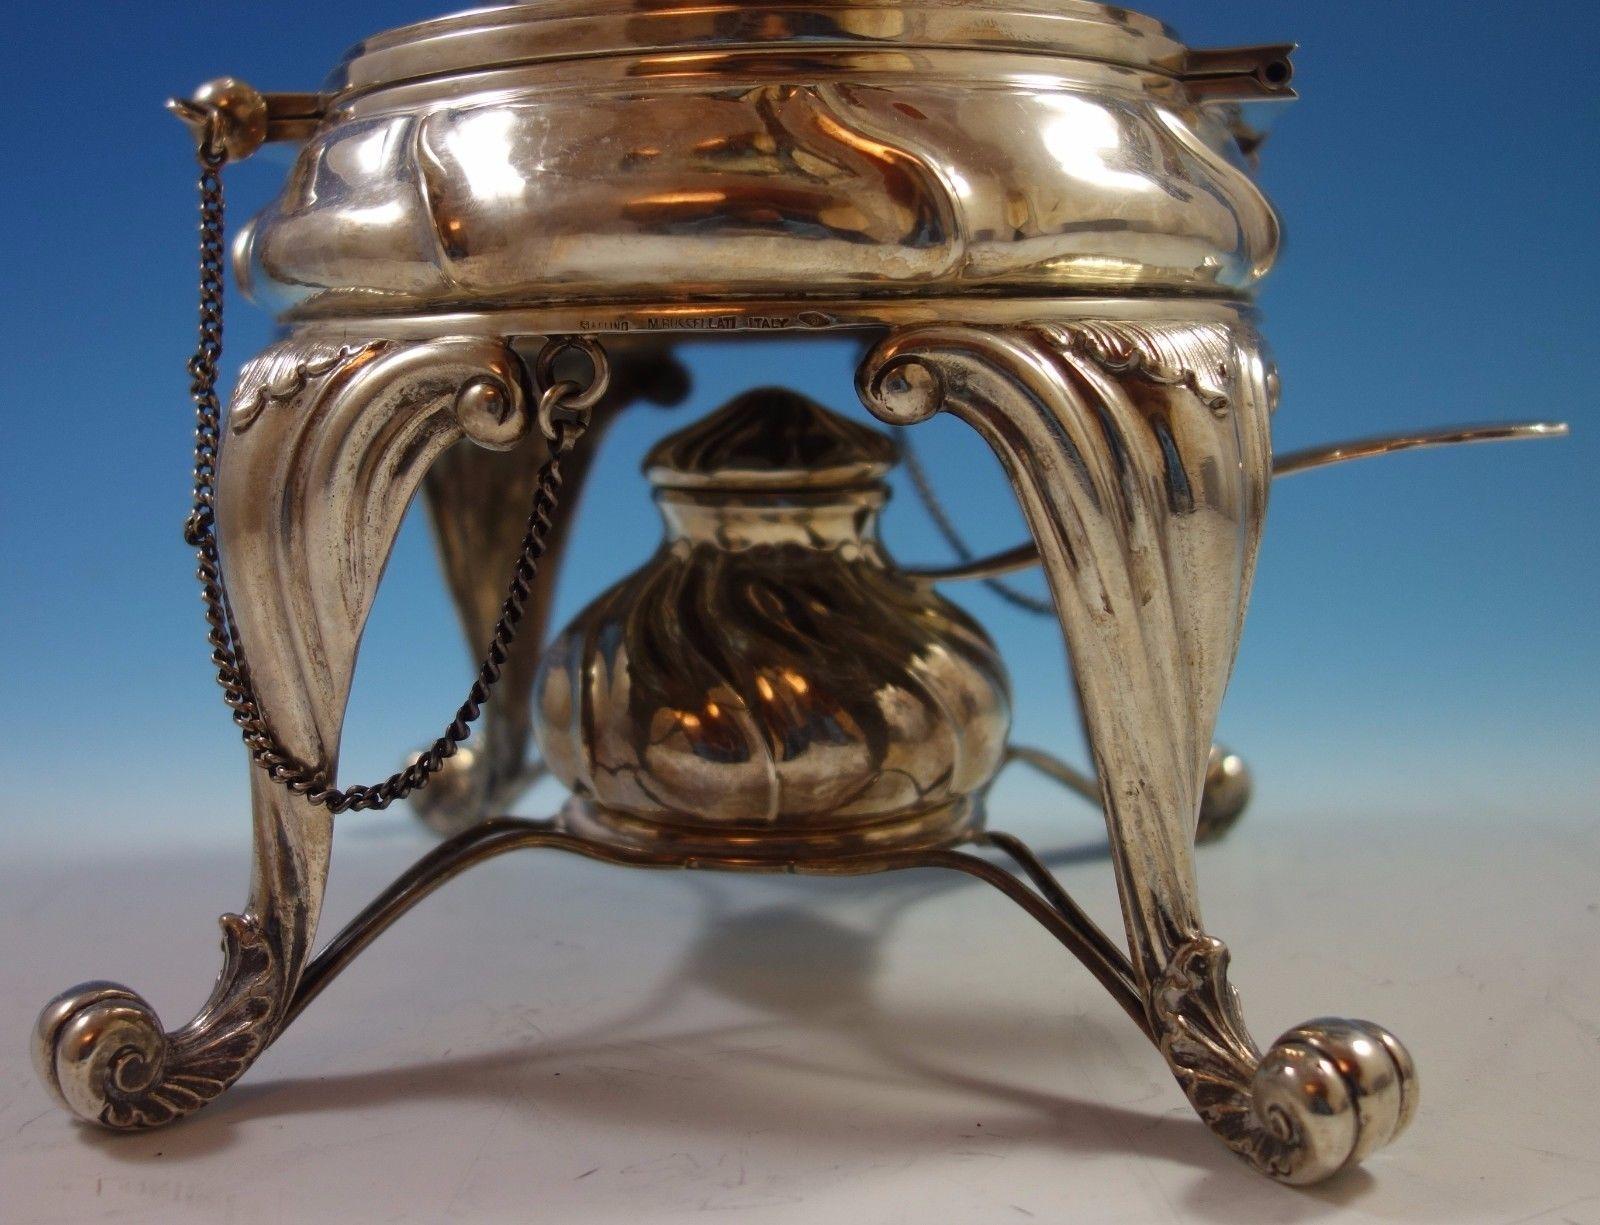 20th Century Torchon by Buccellati Sterling Silver Samovar / Hot Water Urn with Wood